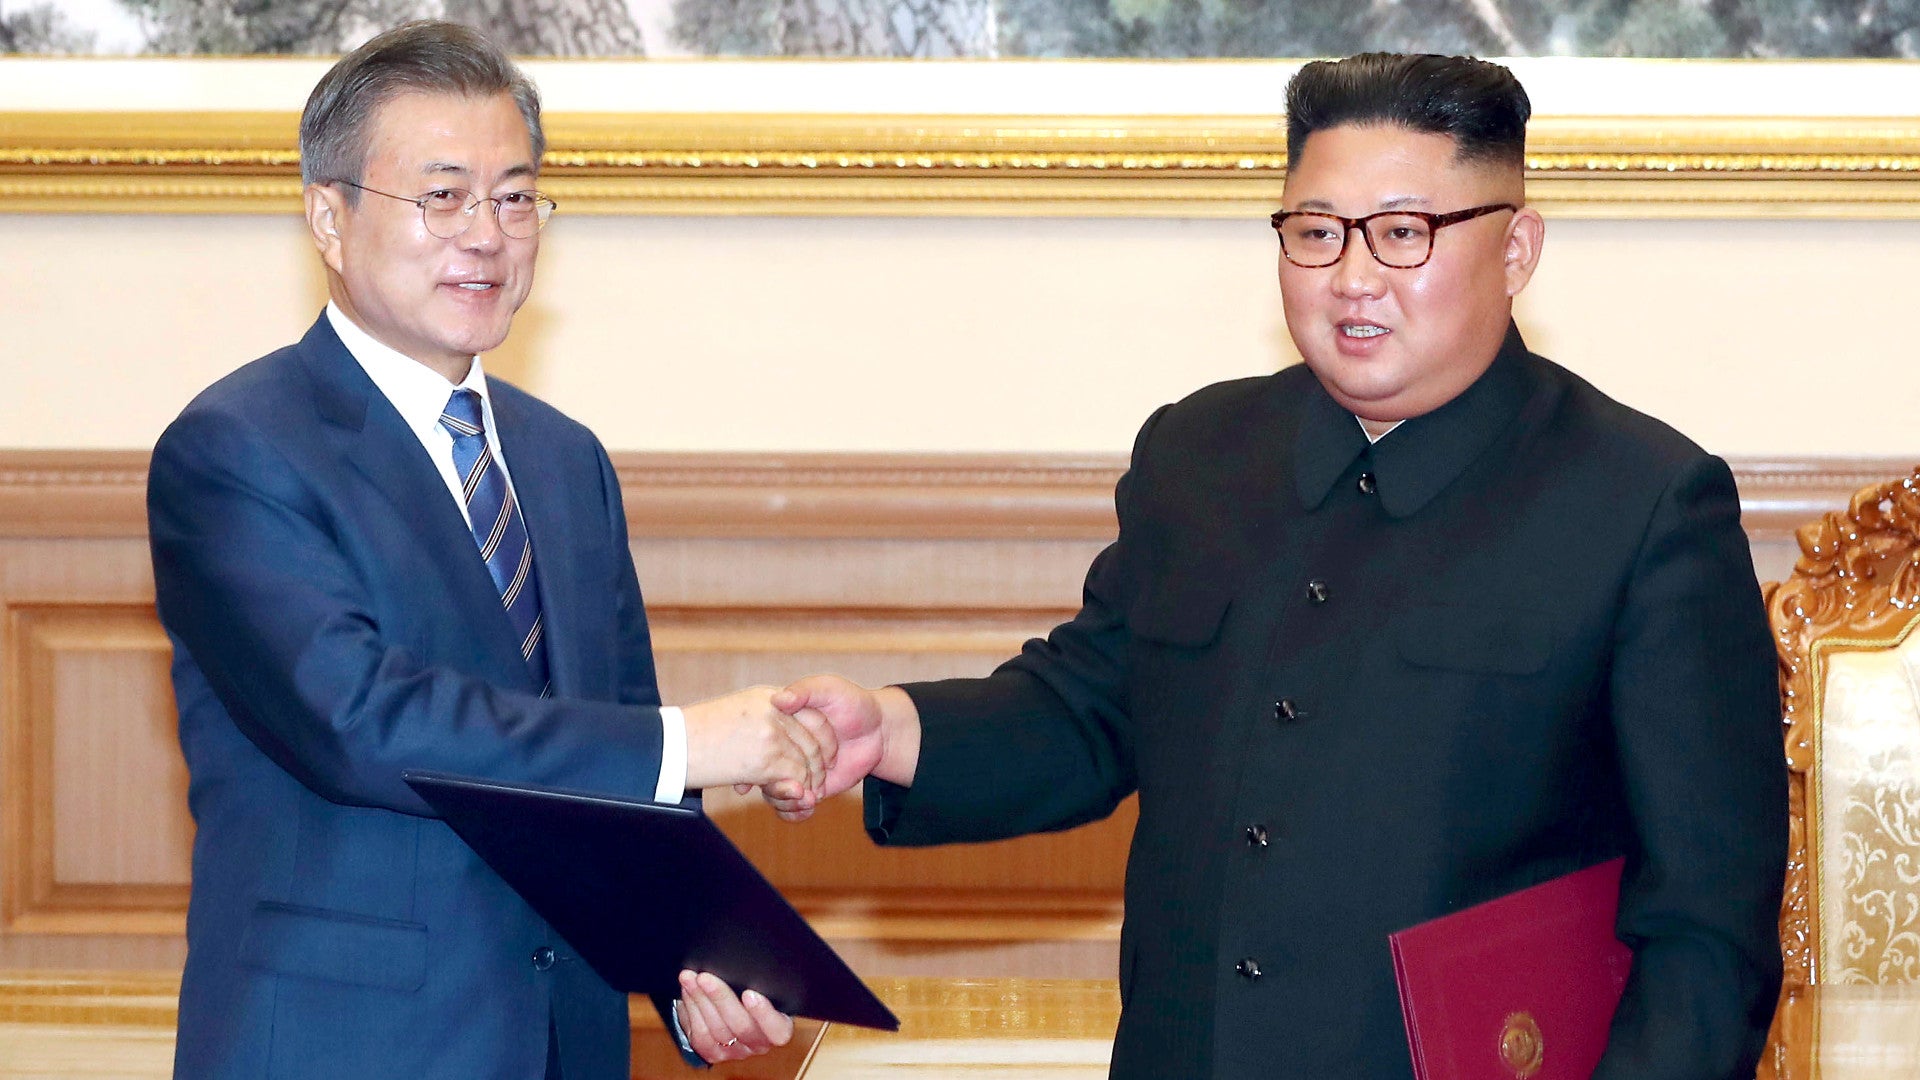 It’s Great To See North And South Korea Get Along, But Kim’s Nukes Aren’t Going Anywhere